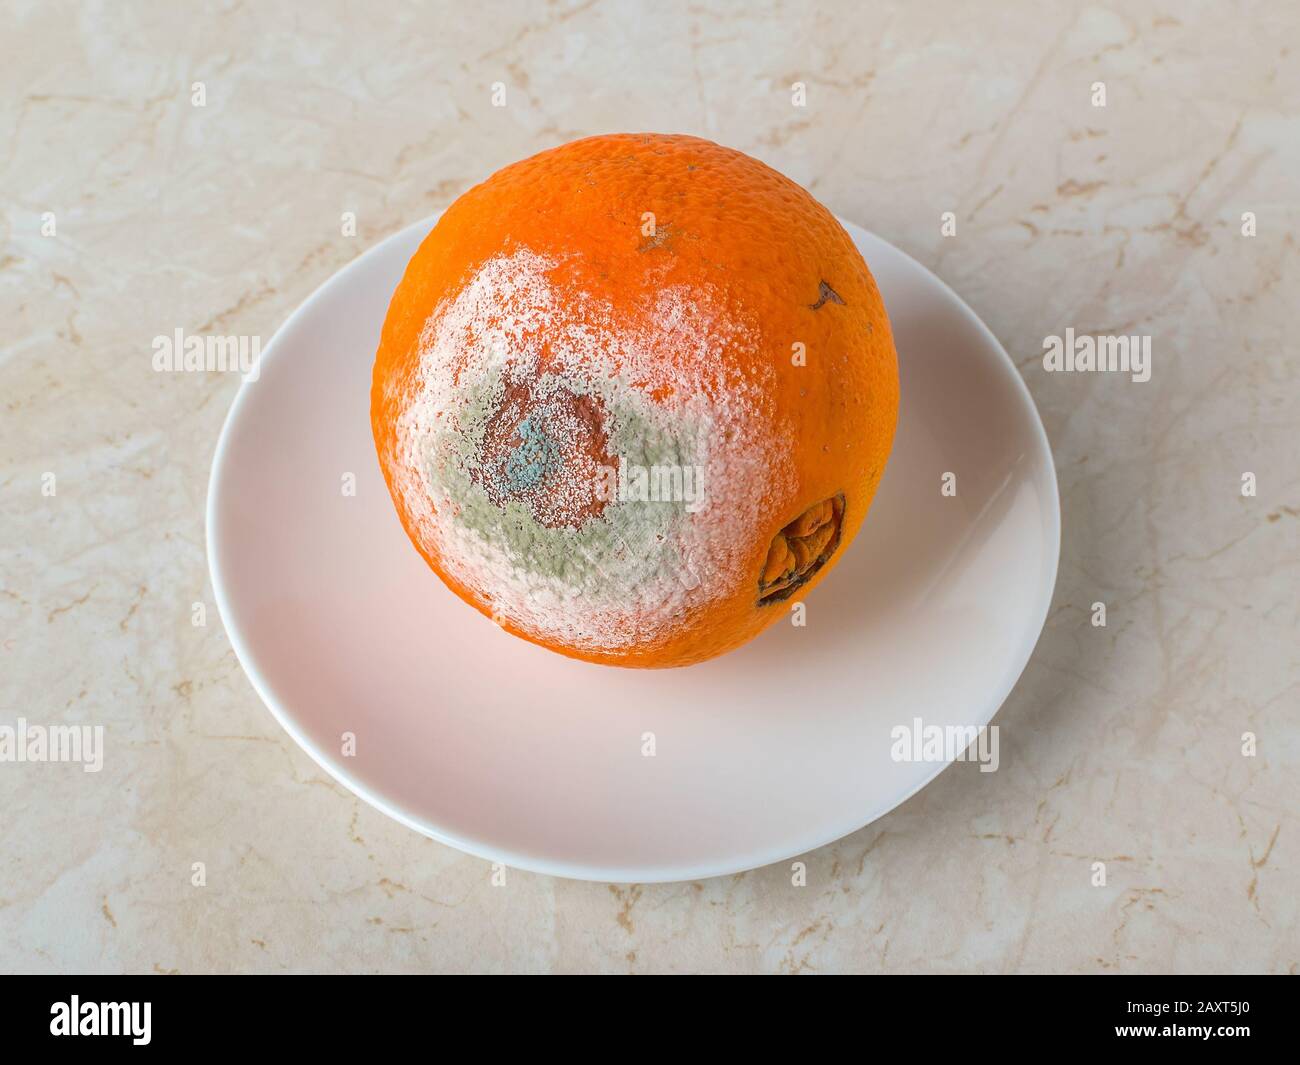 Stale Orange With White Green Mold On A Saucer Over A Kitchen Table